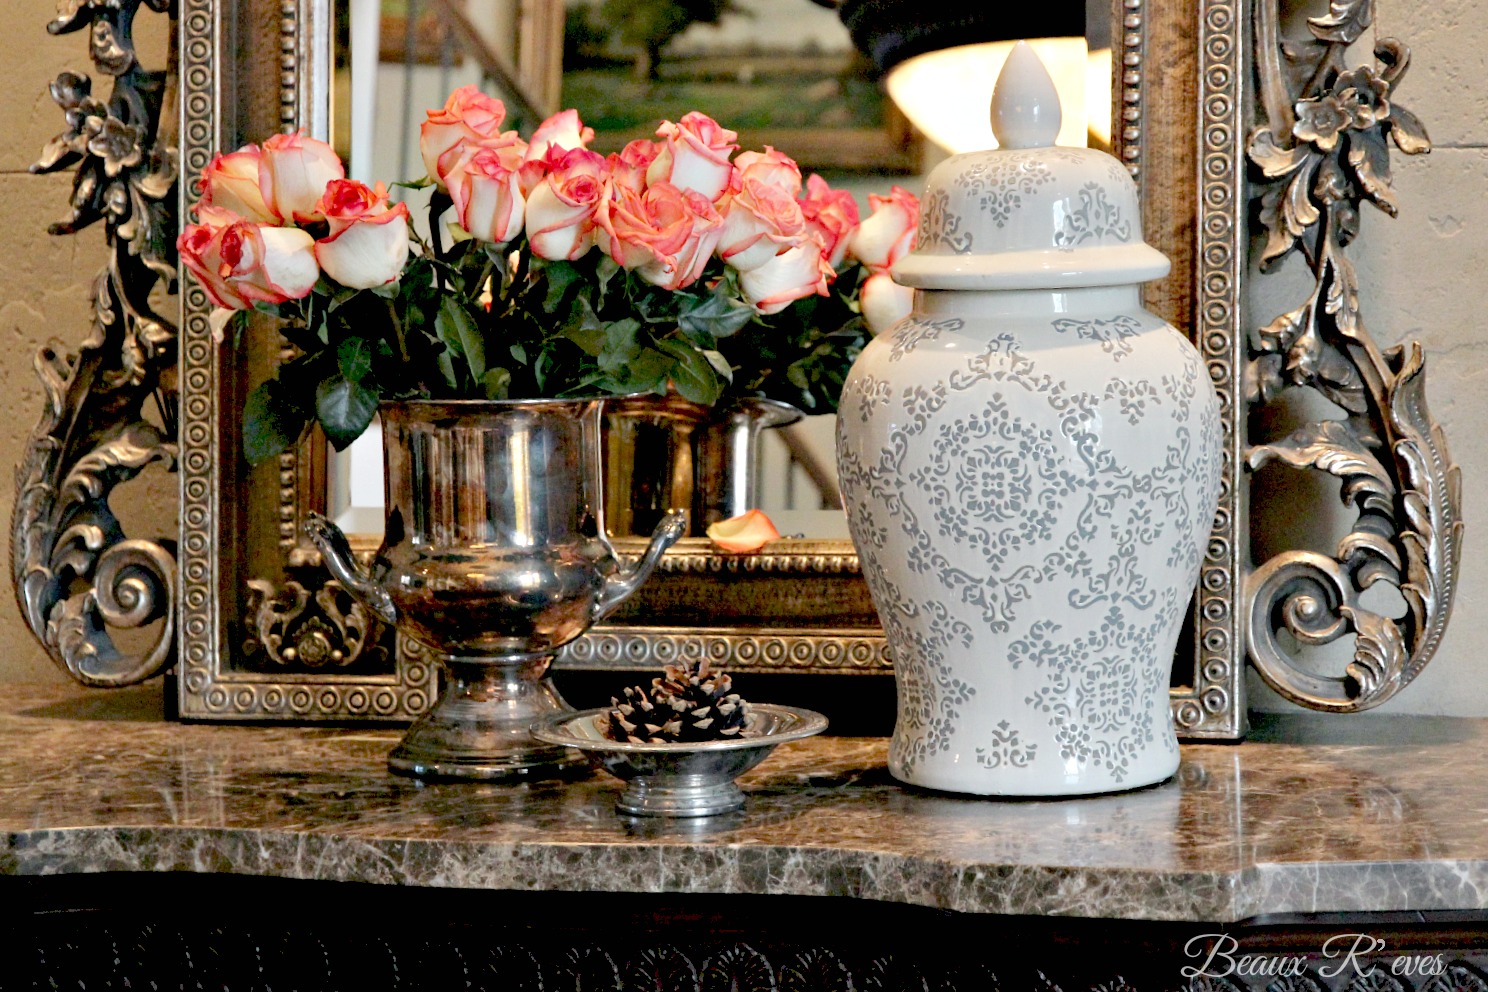 Beaux R'eves -Romantic Vignette-Treasure Hunt Thursday- From My Front Porch To Yours